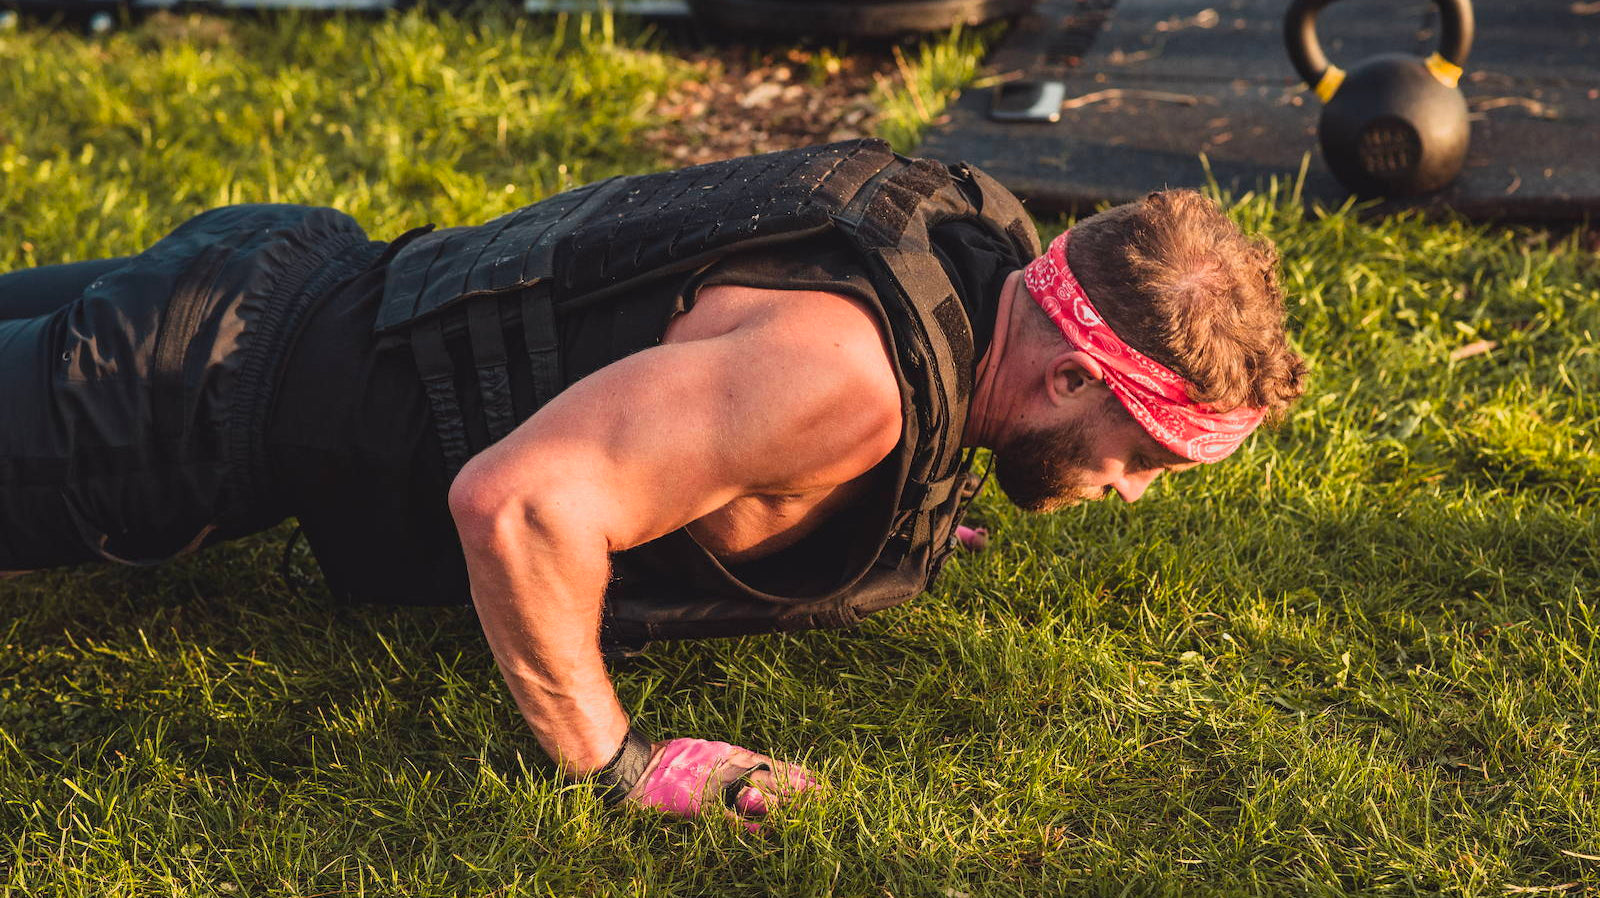 THE WEEKLY WORKOUT - BUILD CANNONBALL DELTS WITH THIS DUMBBELL AND BURPEE BLOWOUT